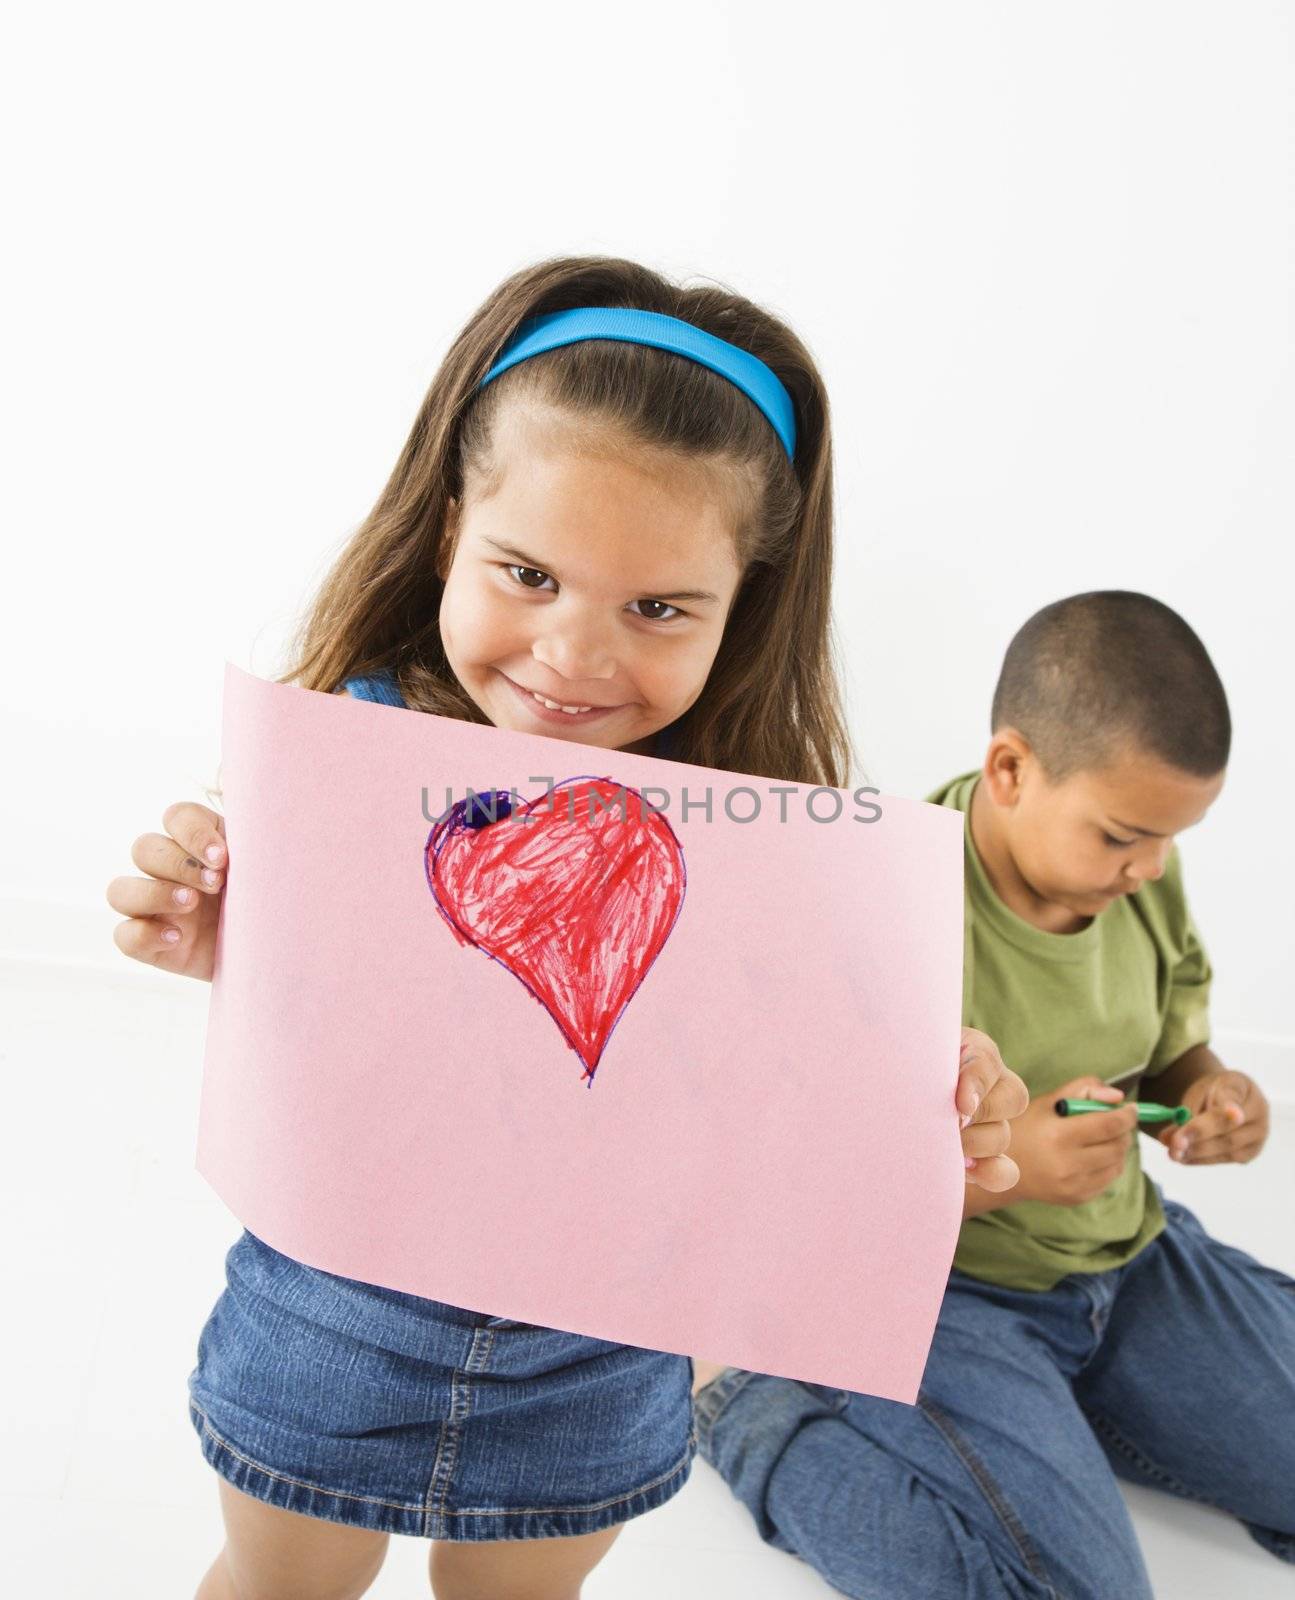 Young girl showing off drawing of heart while boy sits behind her.